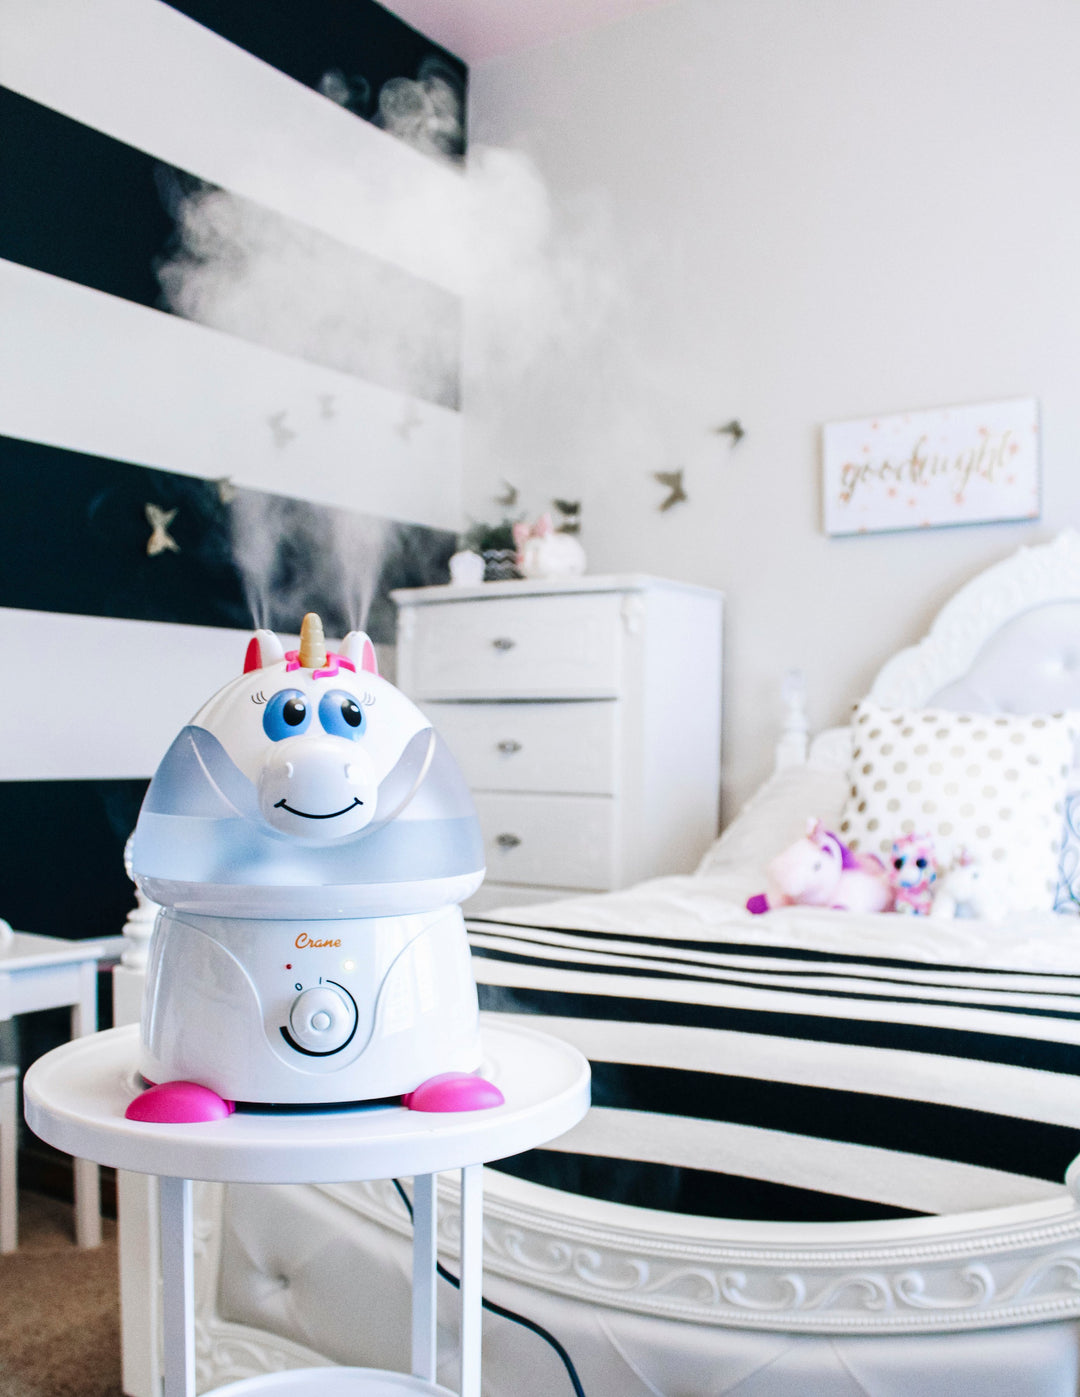 CRANE - 1 Gal. Adorable Ultrasonic Cool Mist Humidifier for Medium to Large Rooms up to 500 sq. ft. - Unicorn - White/Pink_7